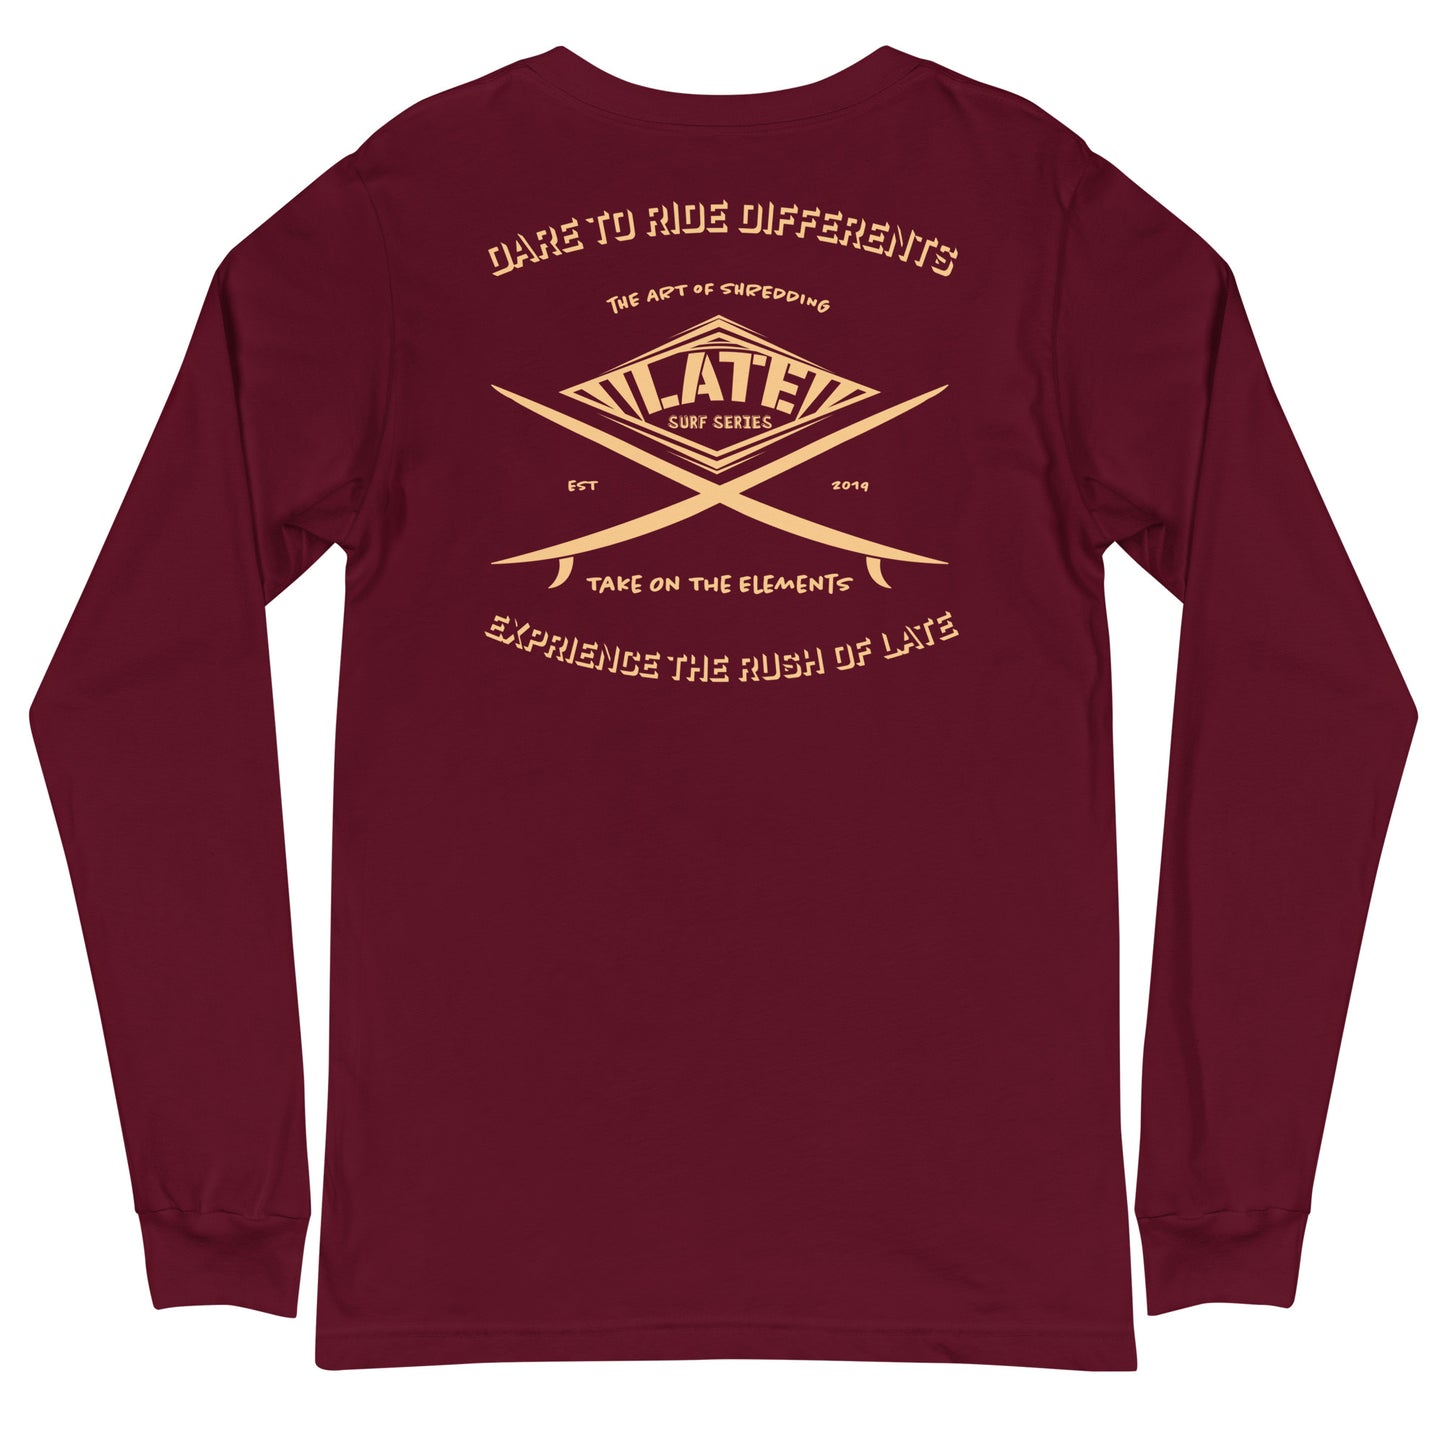 Long Sleeve surf vintage Take On The Elements Logo Late surf series, texte dare to ride differents couleur bordeaux